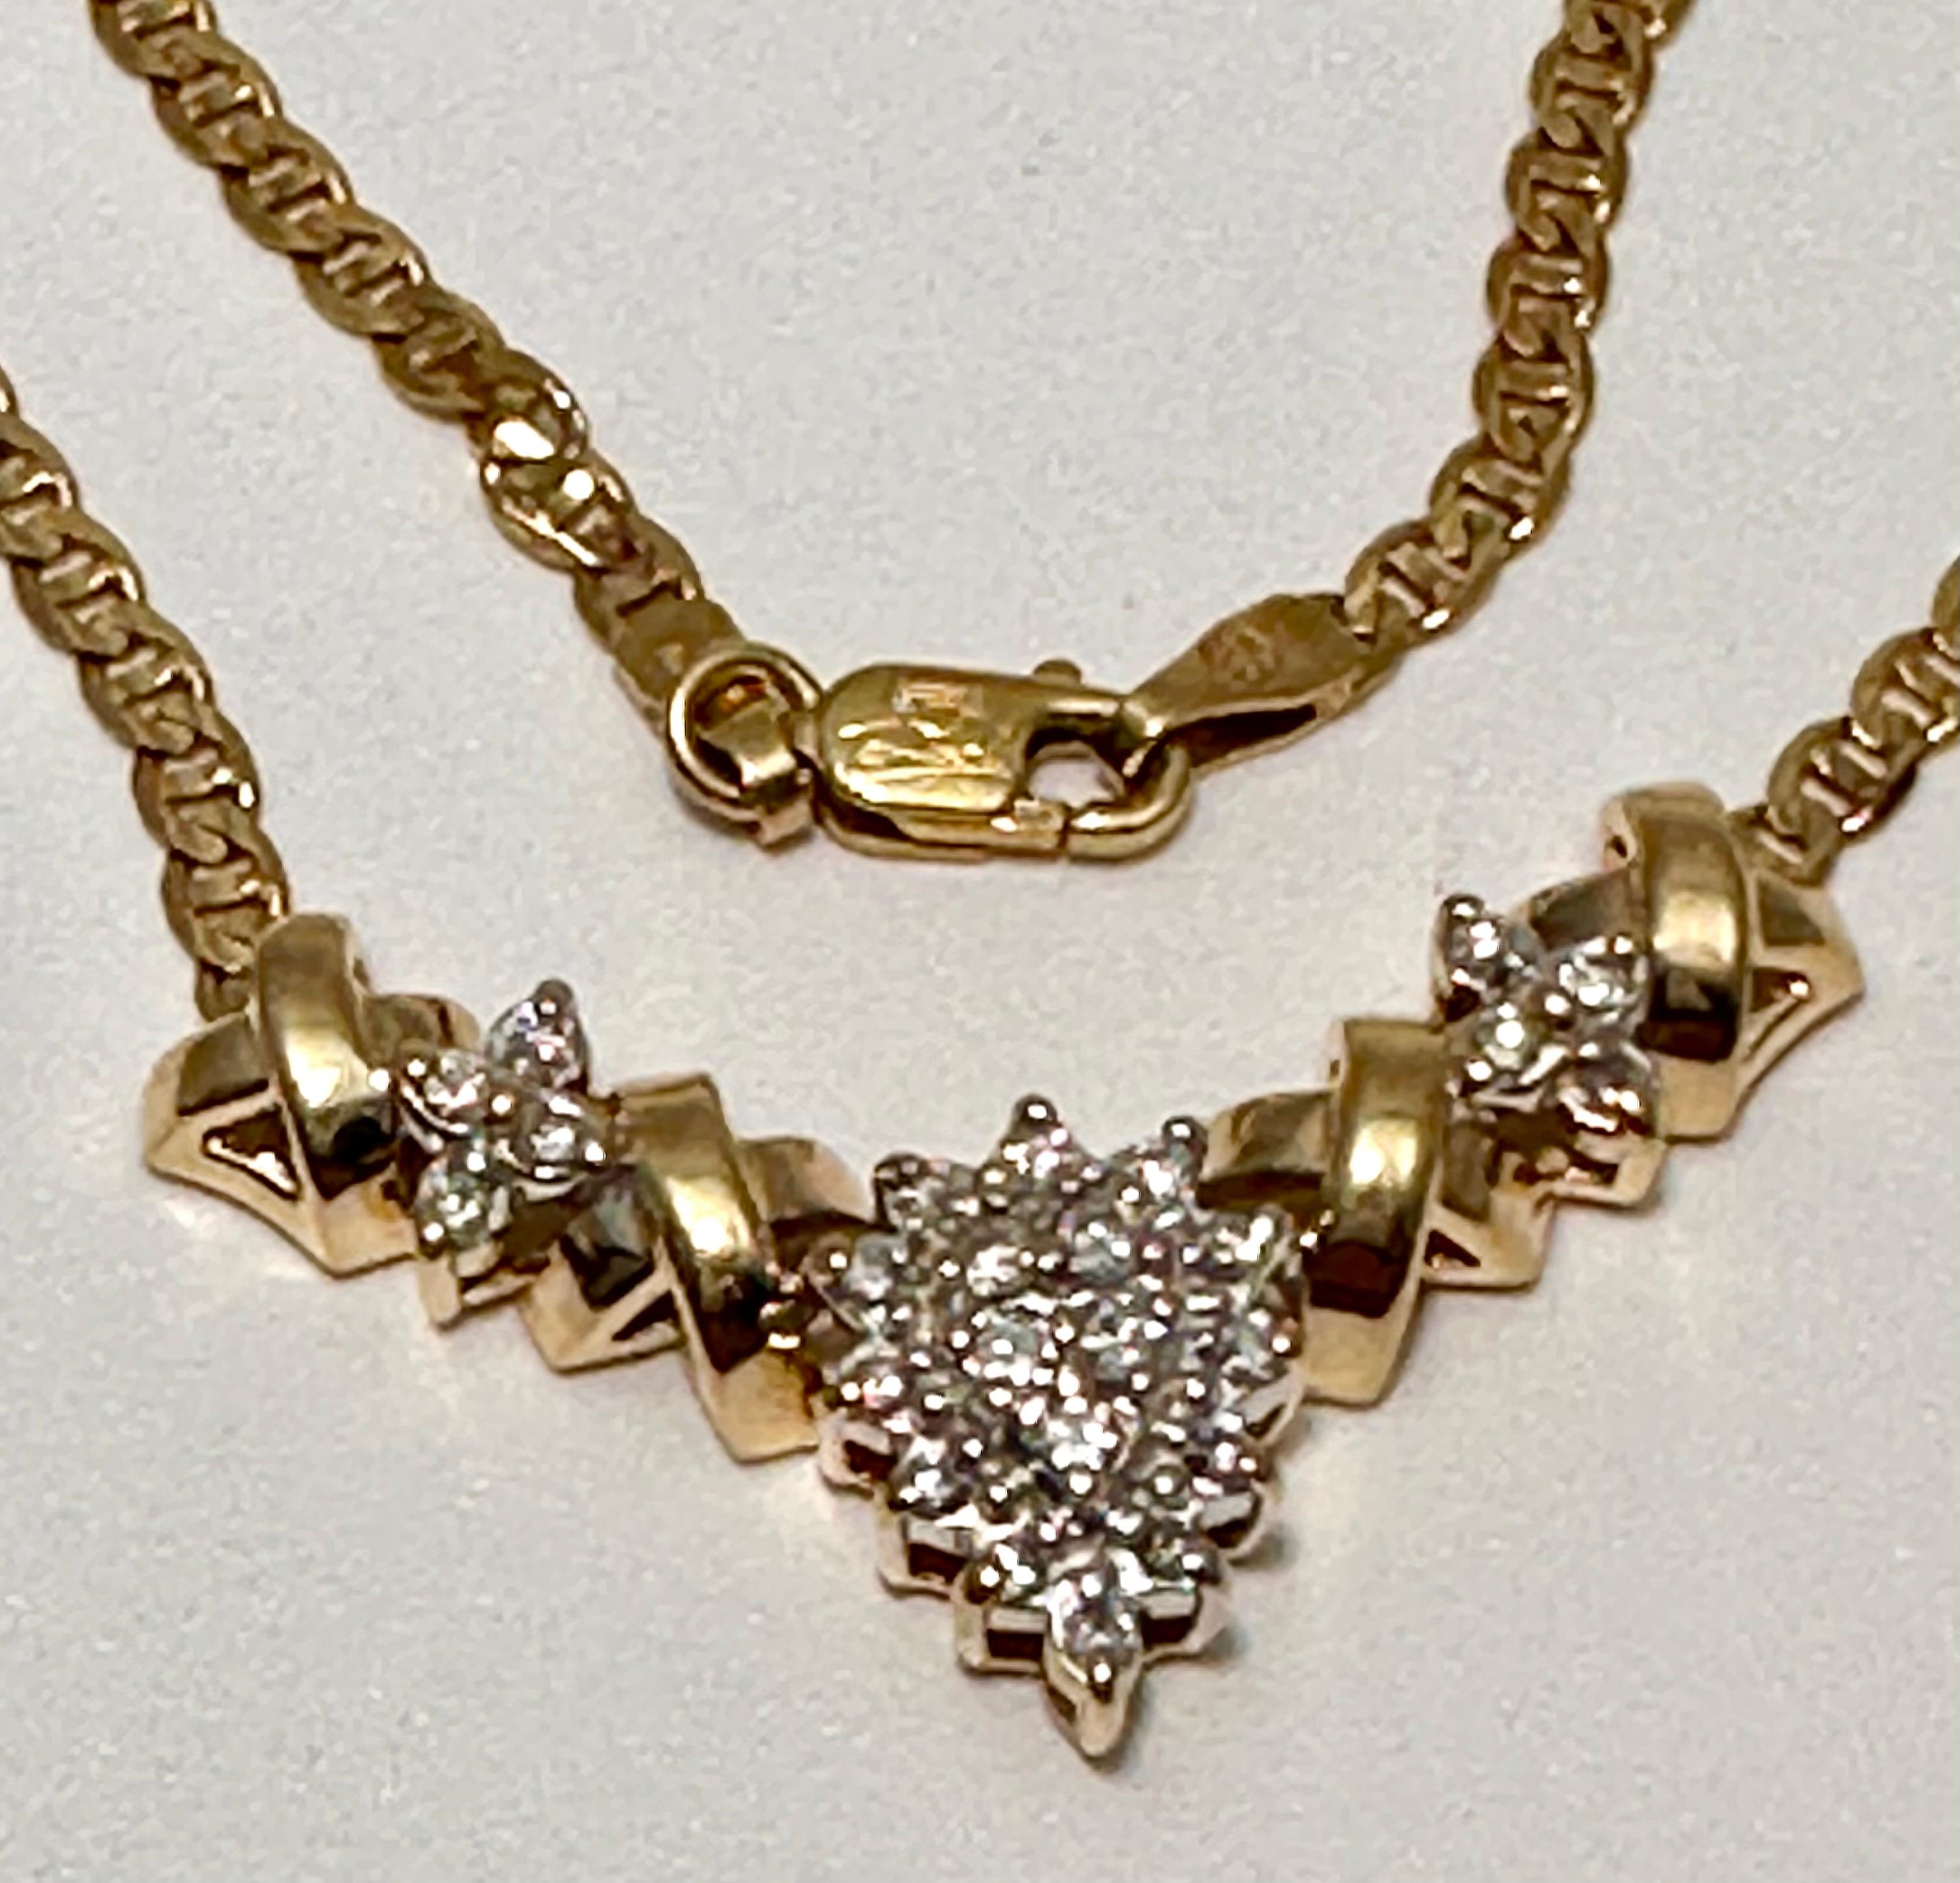 This 14kt Yellow Gold Sparkly Pear Shaped Diamond Cluster necklace is the ideal piece to add some sparkle to your jewelry collection. Effortlessly adding elegance to any outfit, this piece is perfect for any occasion. The stunning 18